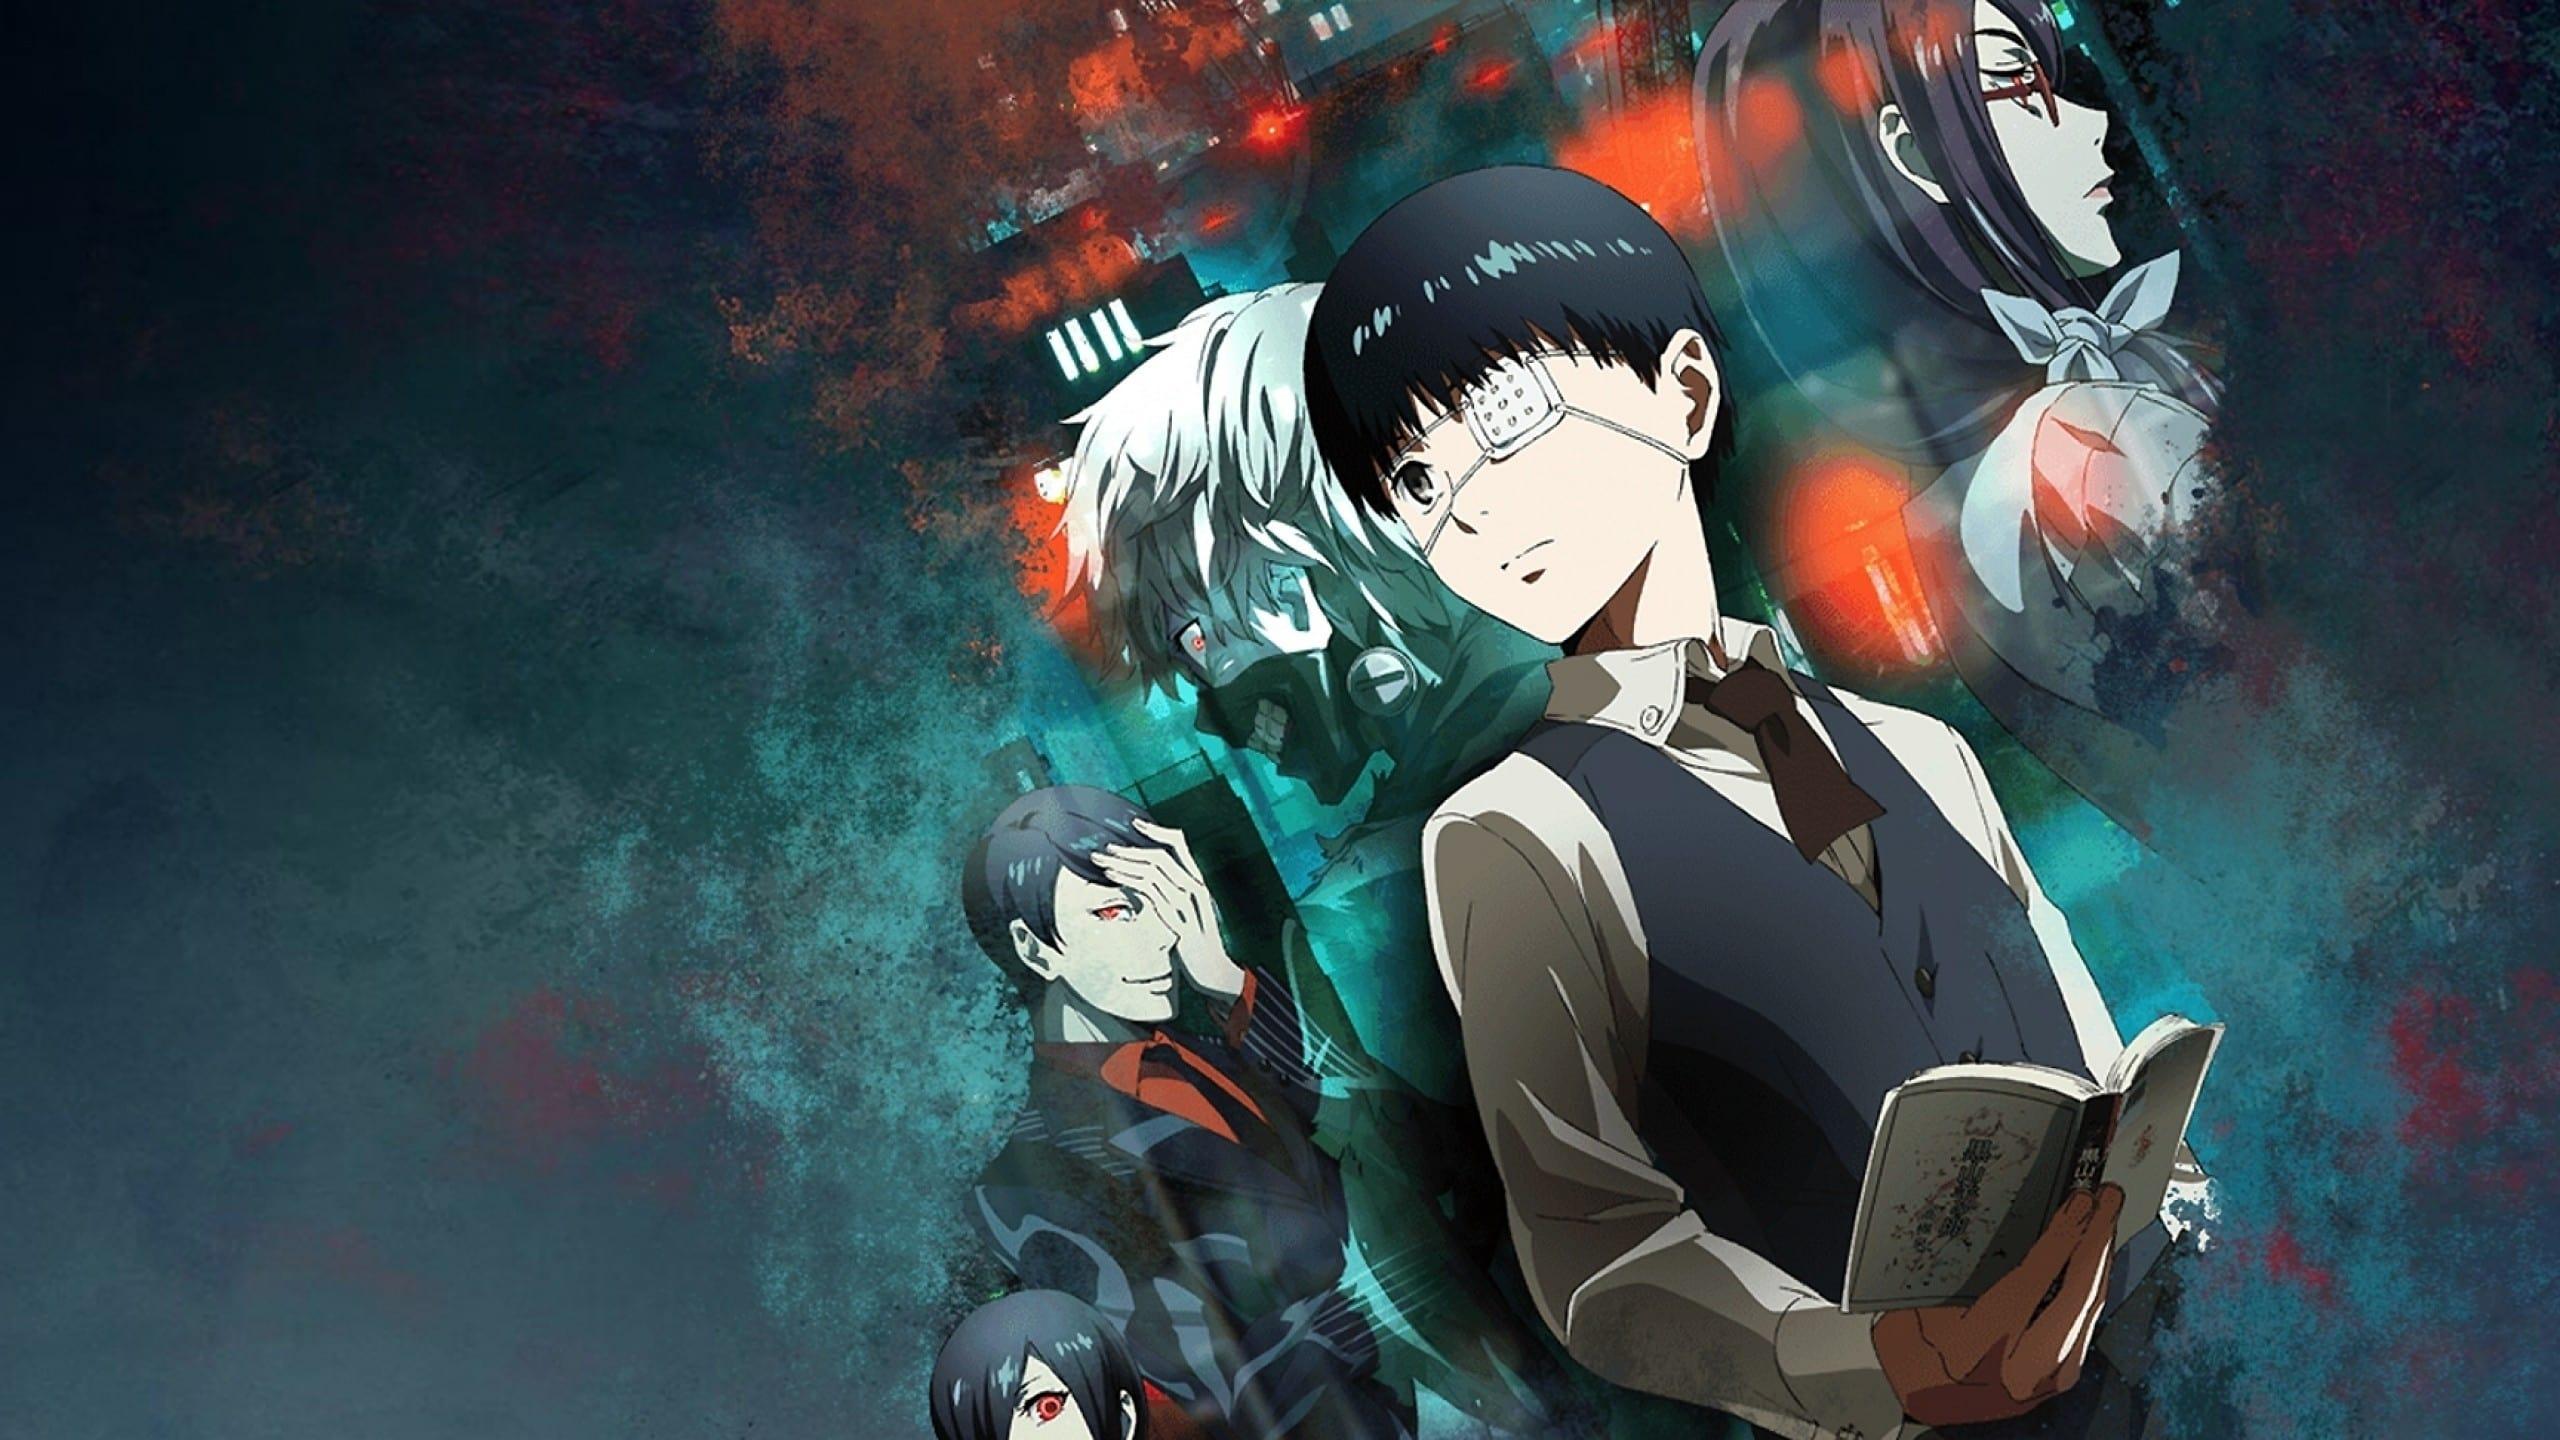 Tokyo Ghoul - movie: where to watch streaming online